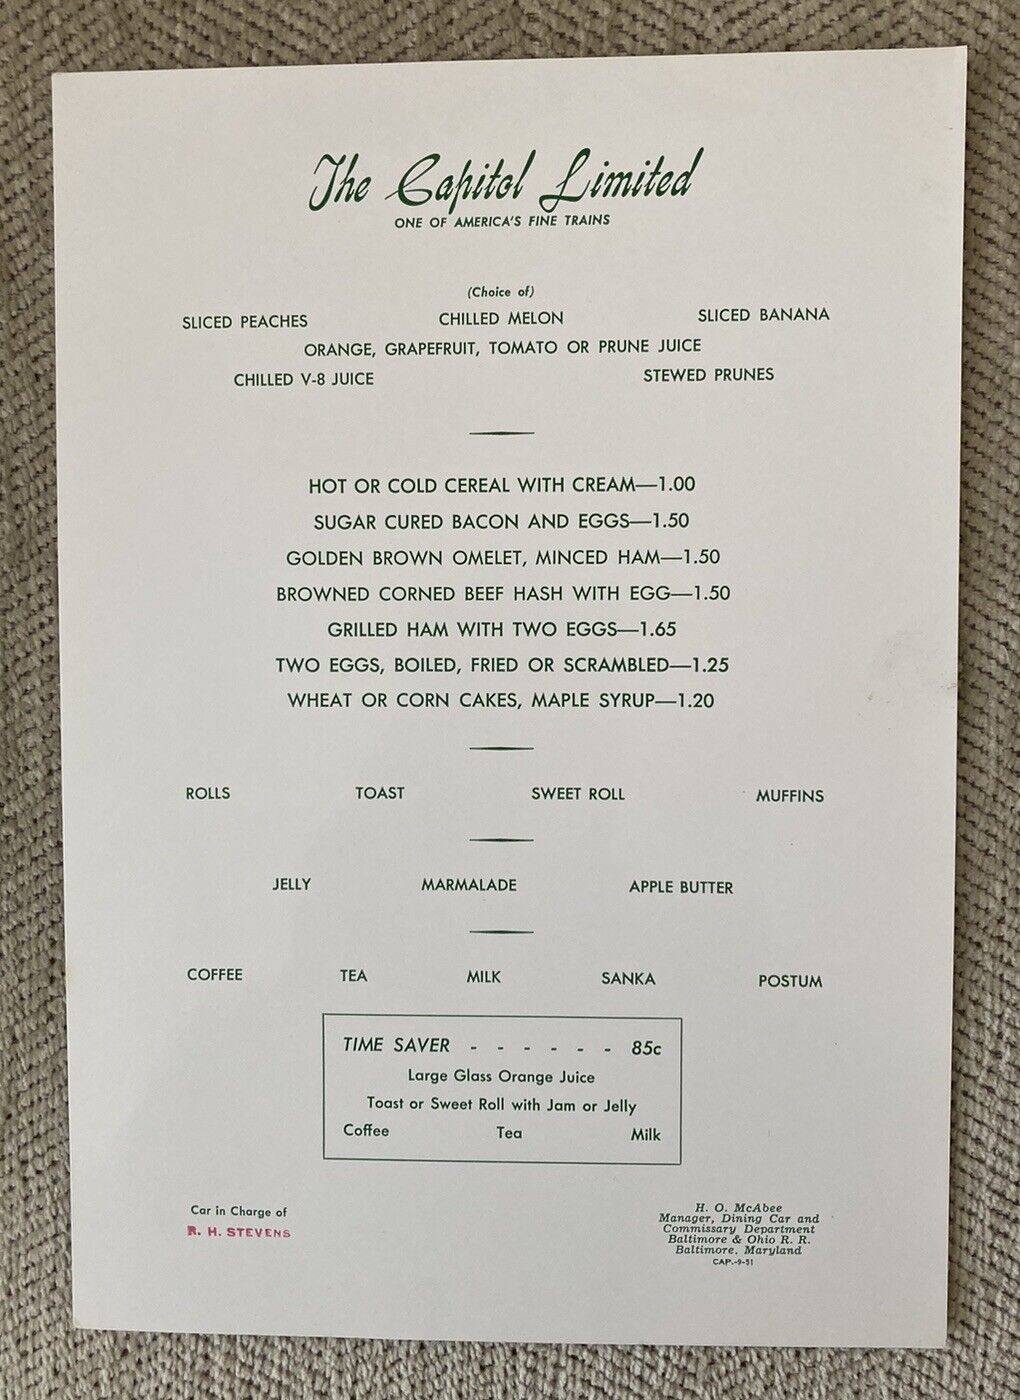 B&O RR (Baltimore and Ohio) Breakfast Menu:”The Capitol Limited”